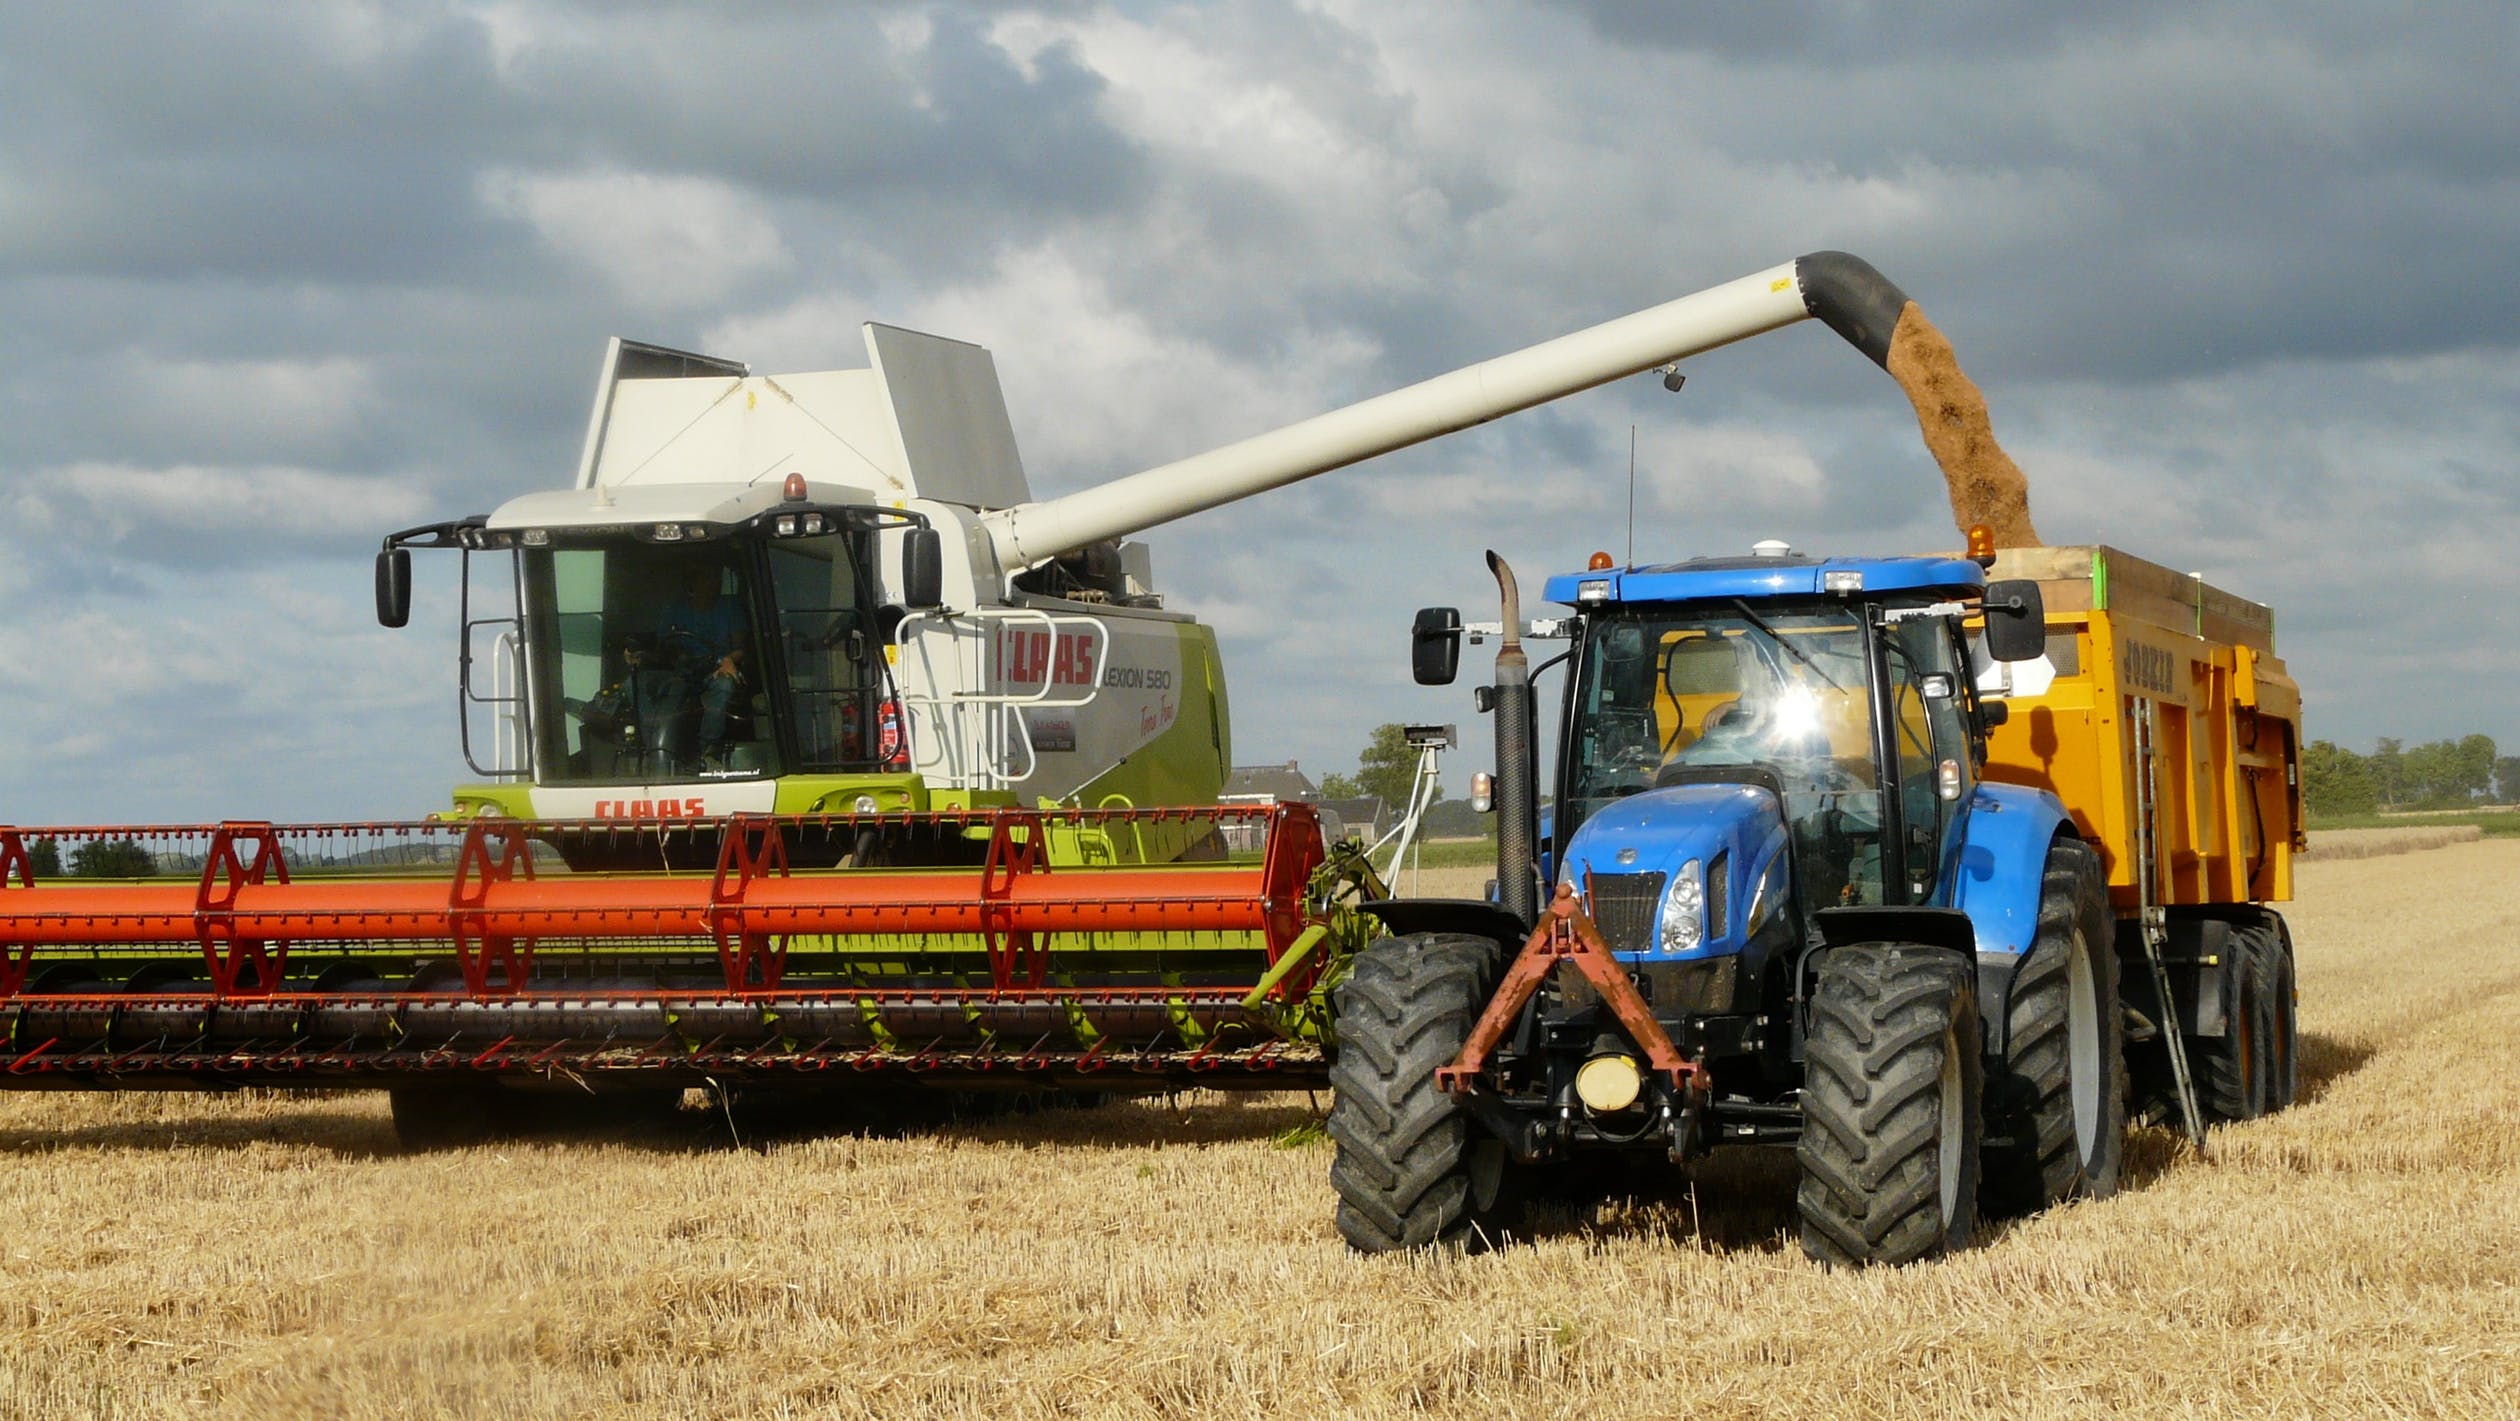 What Machinery Jobs do Agricultural and Farming Jobs recruit for?